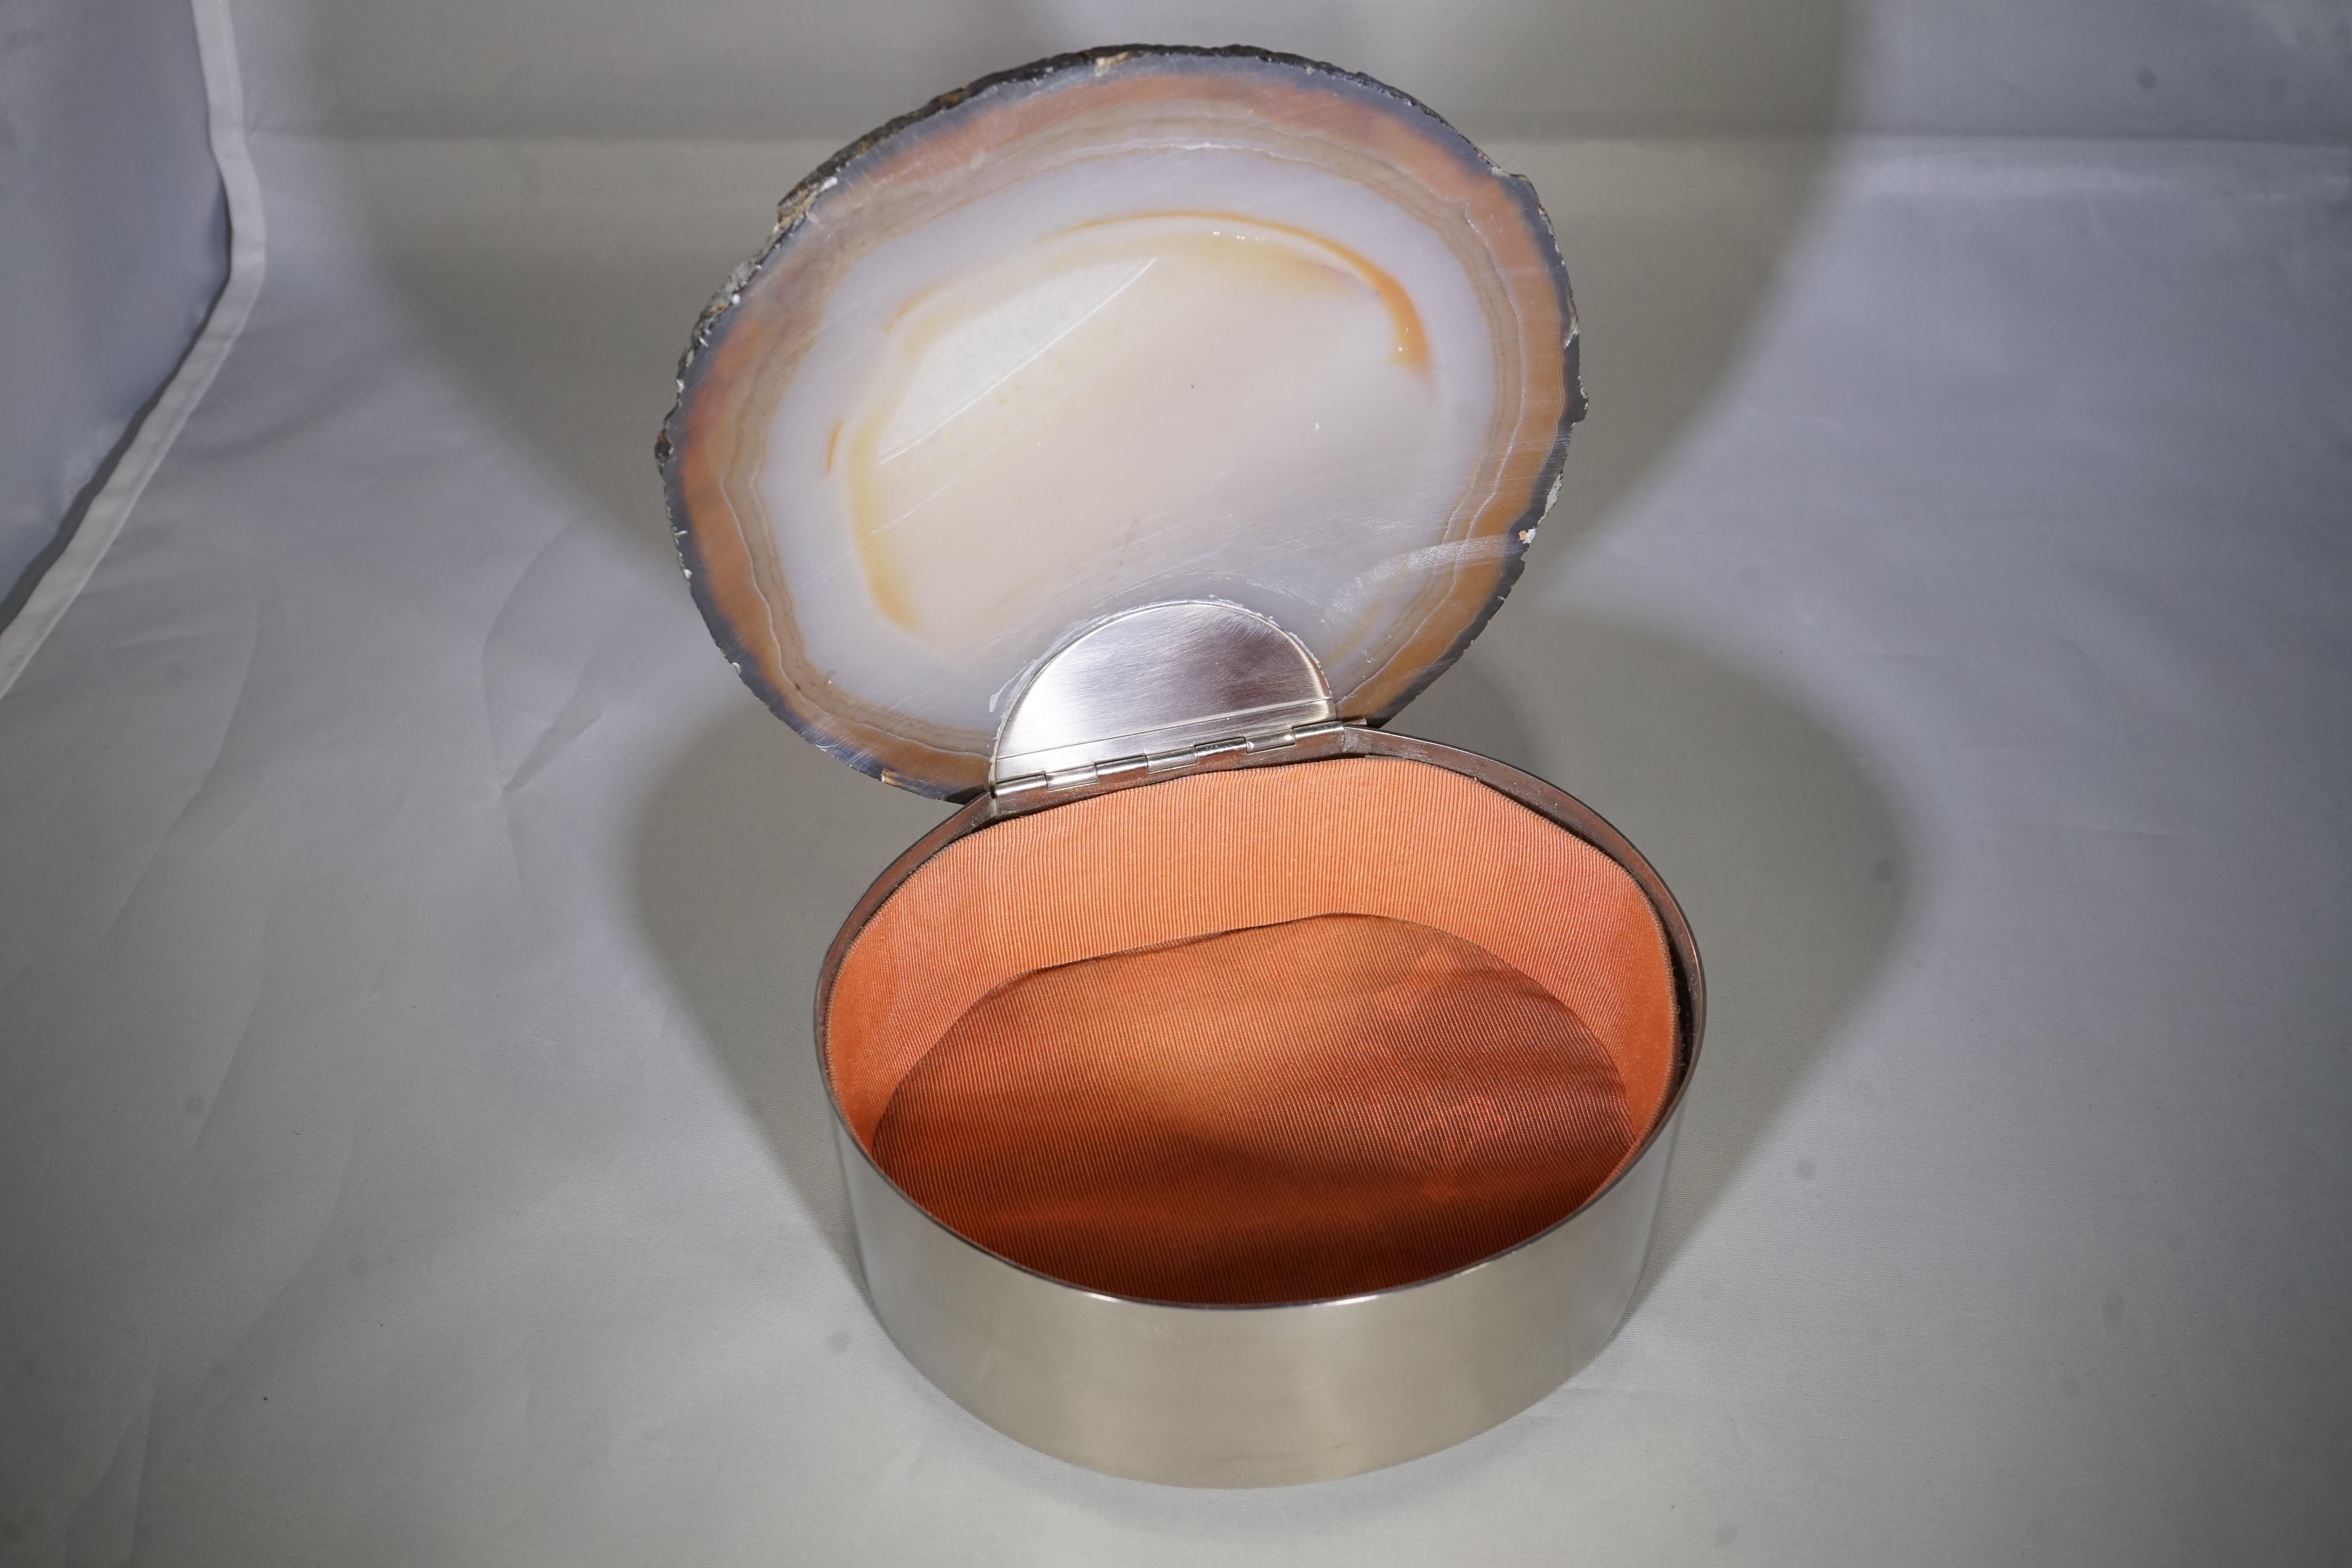 1950s French vide pouche box featuring an agate stone lid with a silver plated base. Lined in fabric.